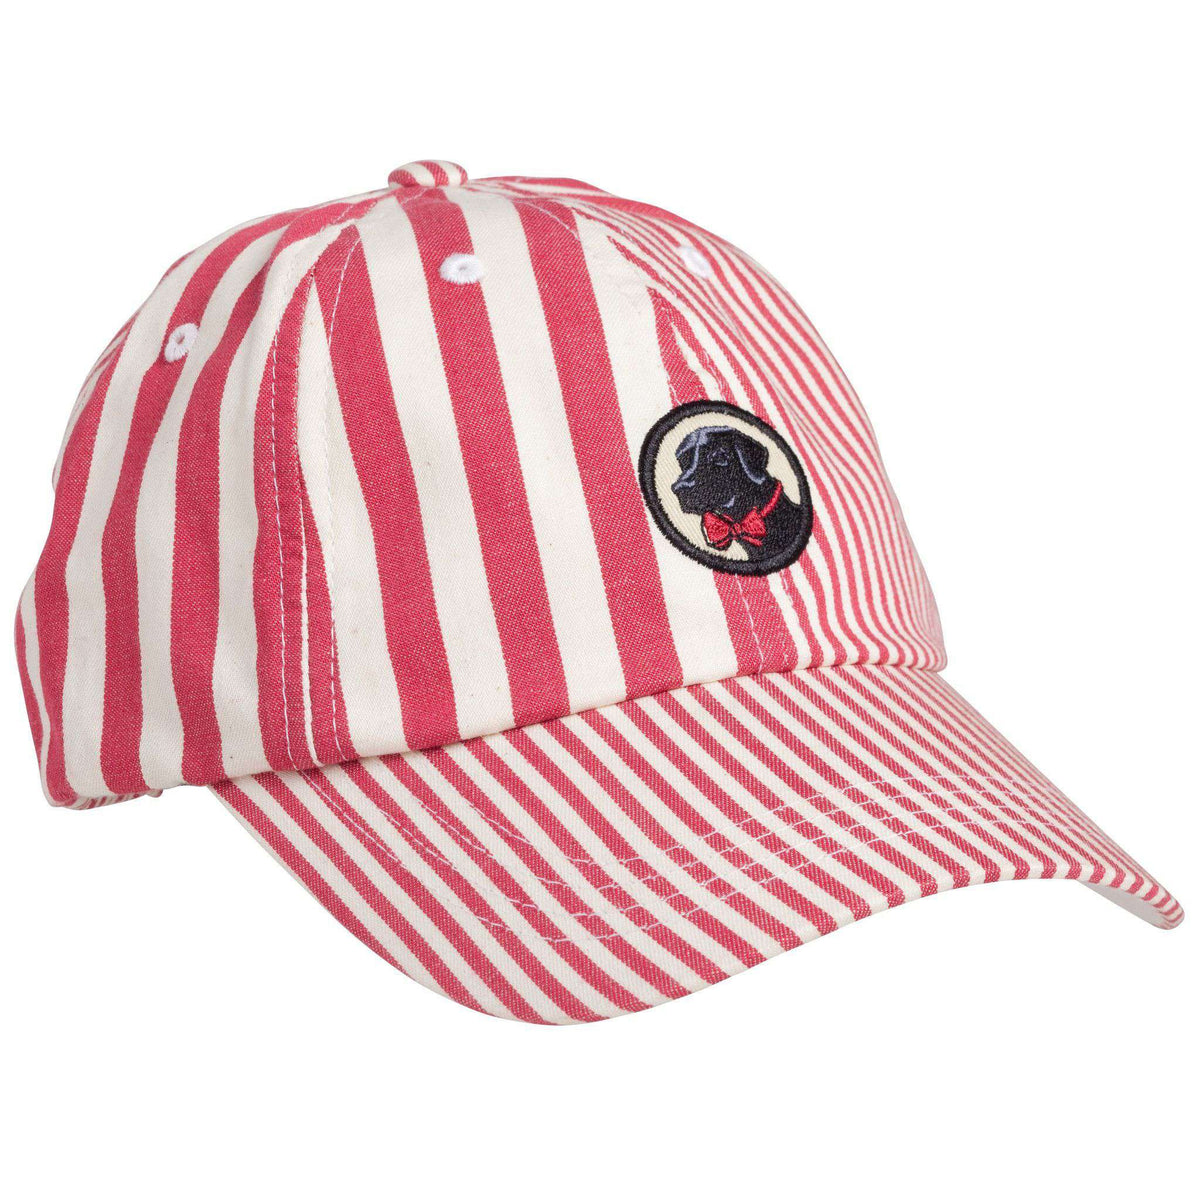 Patchwork Frat Hat in Red Madras by Southern Proper - Country Club Prep